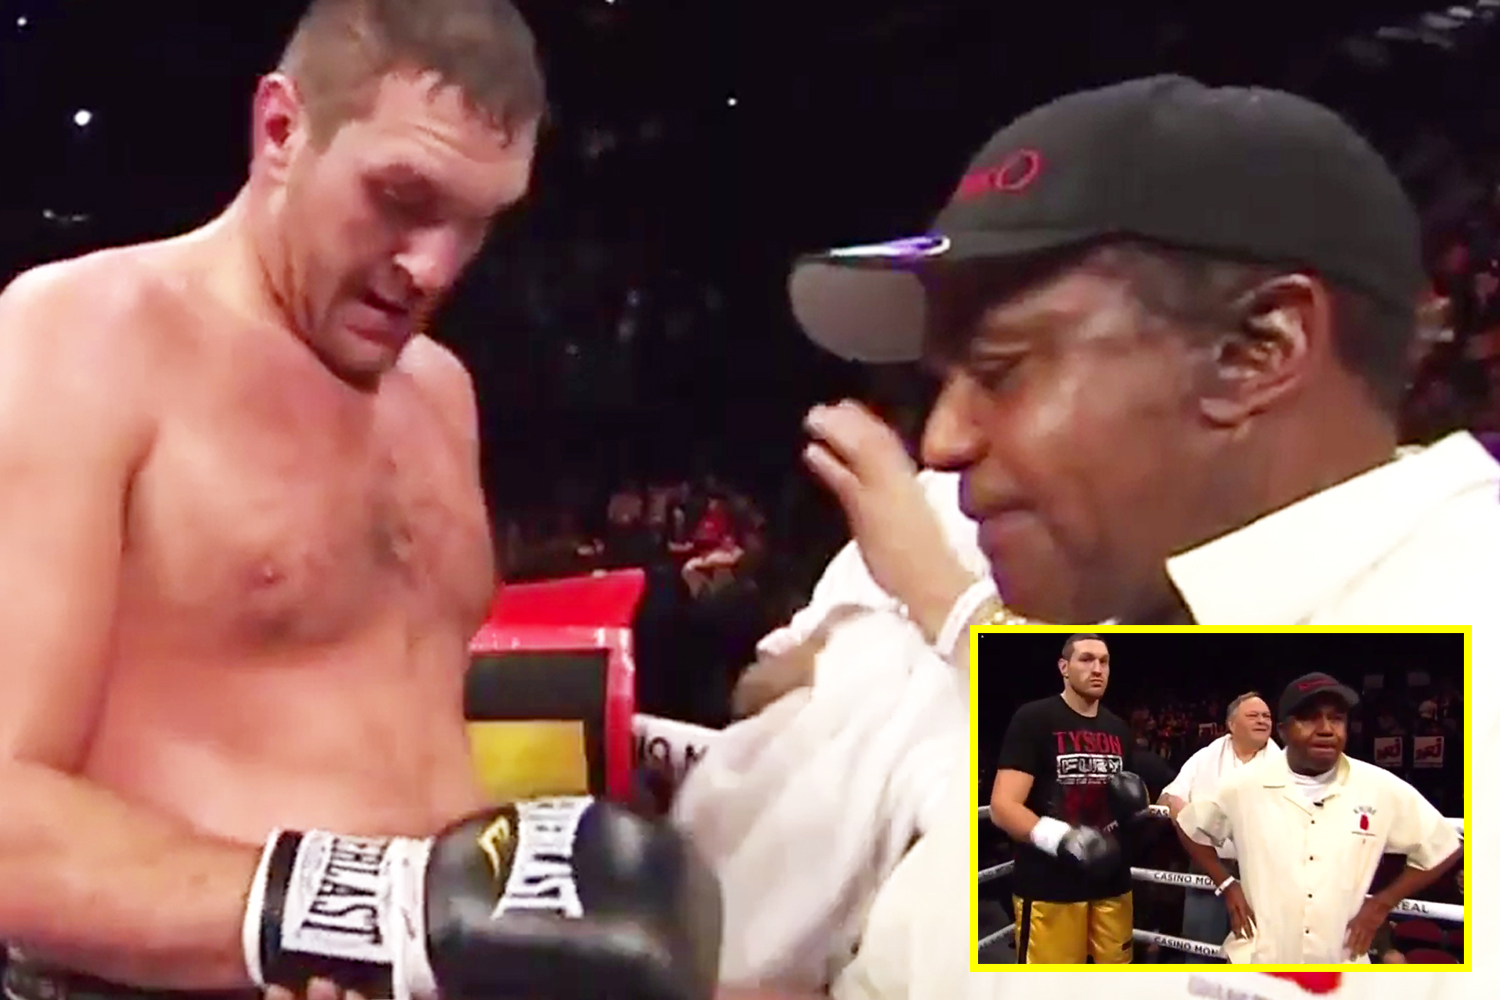 The forgotten Tyson Fury fight with Emanuel Steward in his corner as legendary Lennox Lewis and Wladimir Klitschko trainer coached him before nephew SugarHill helped dethrone Deontay Wilder